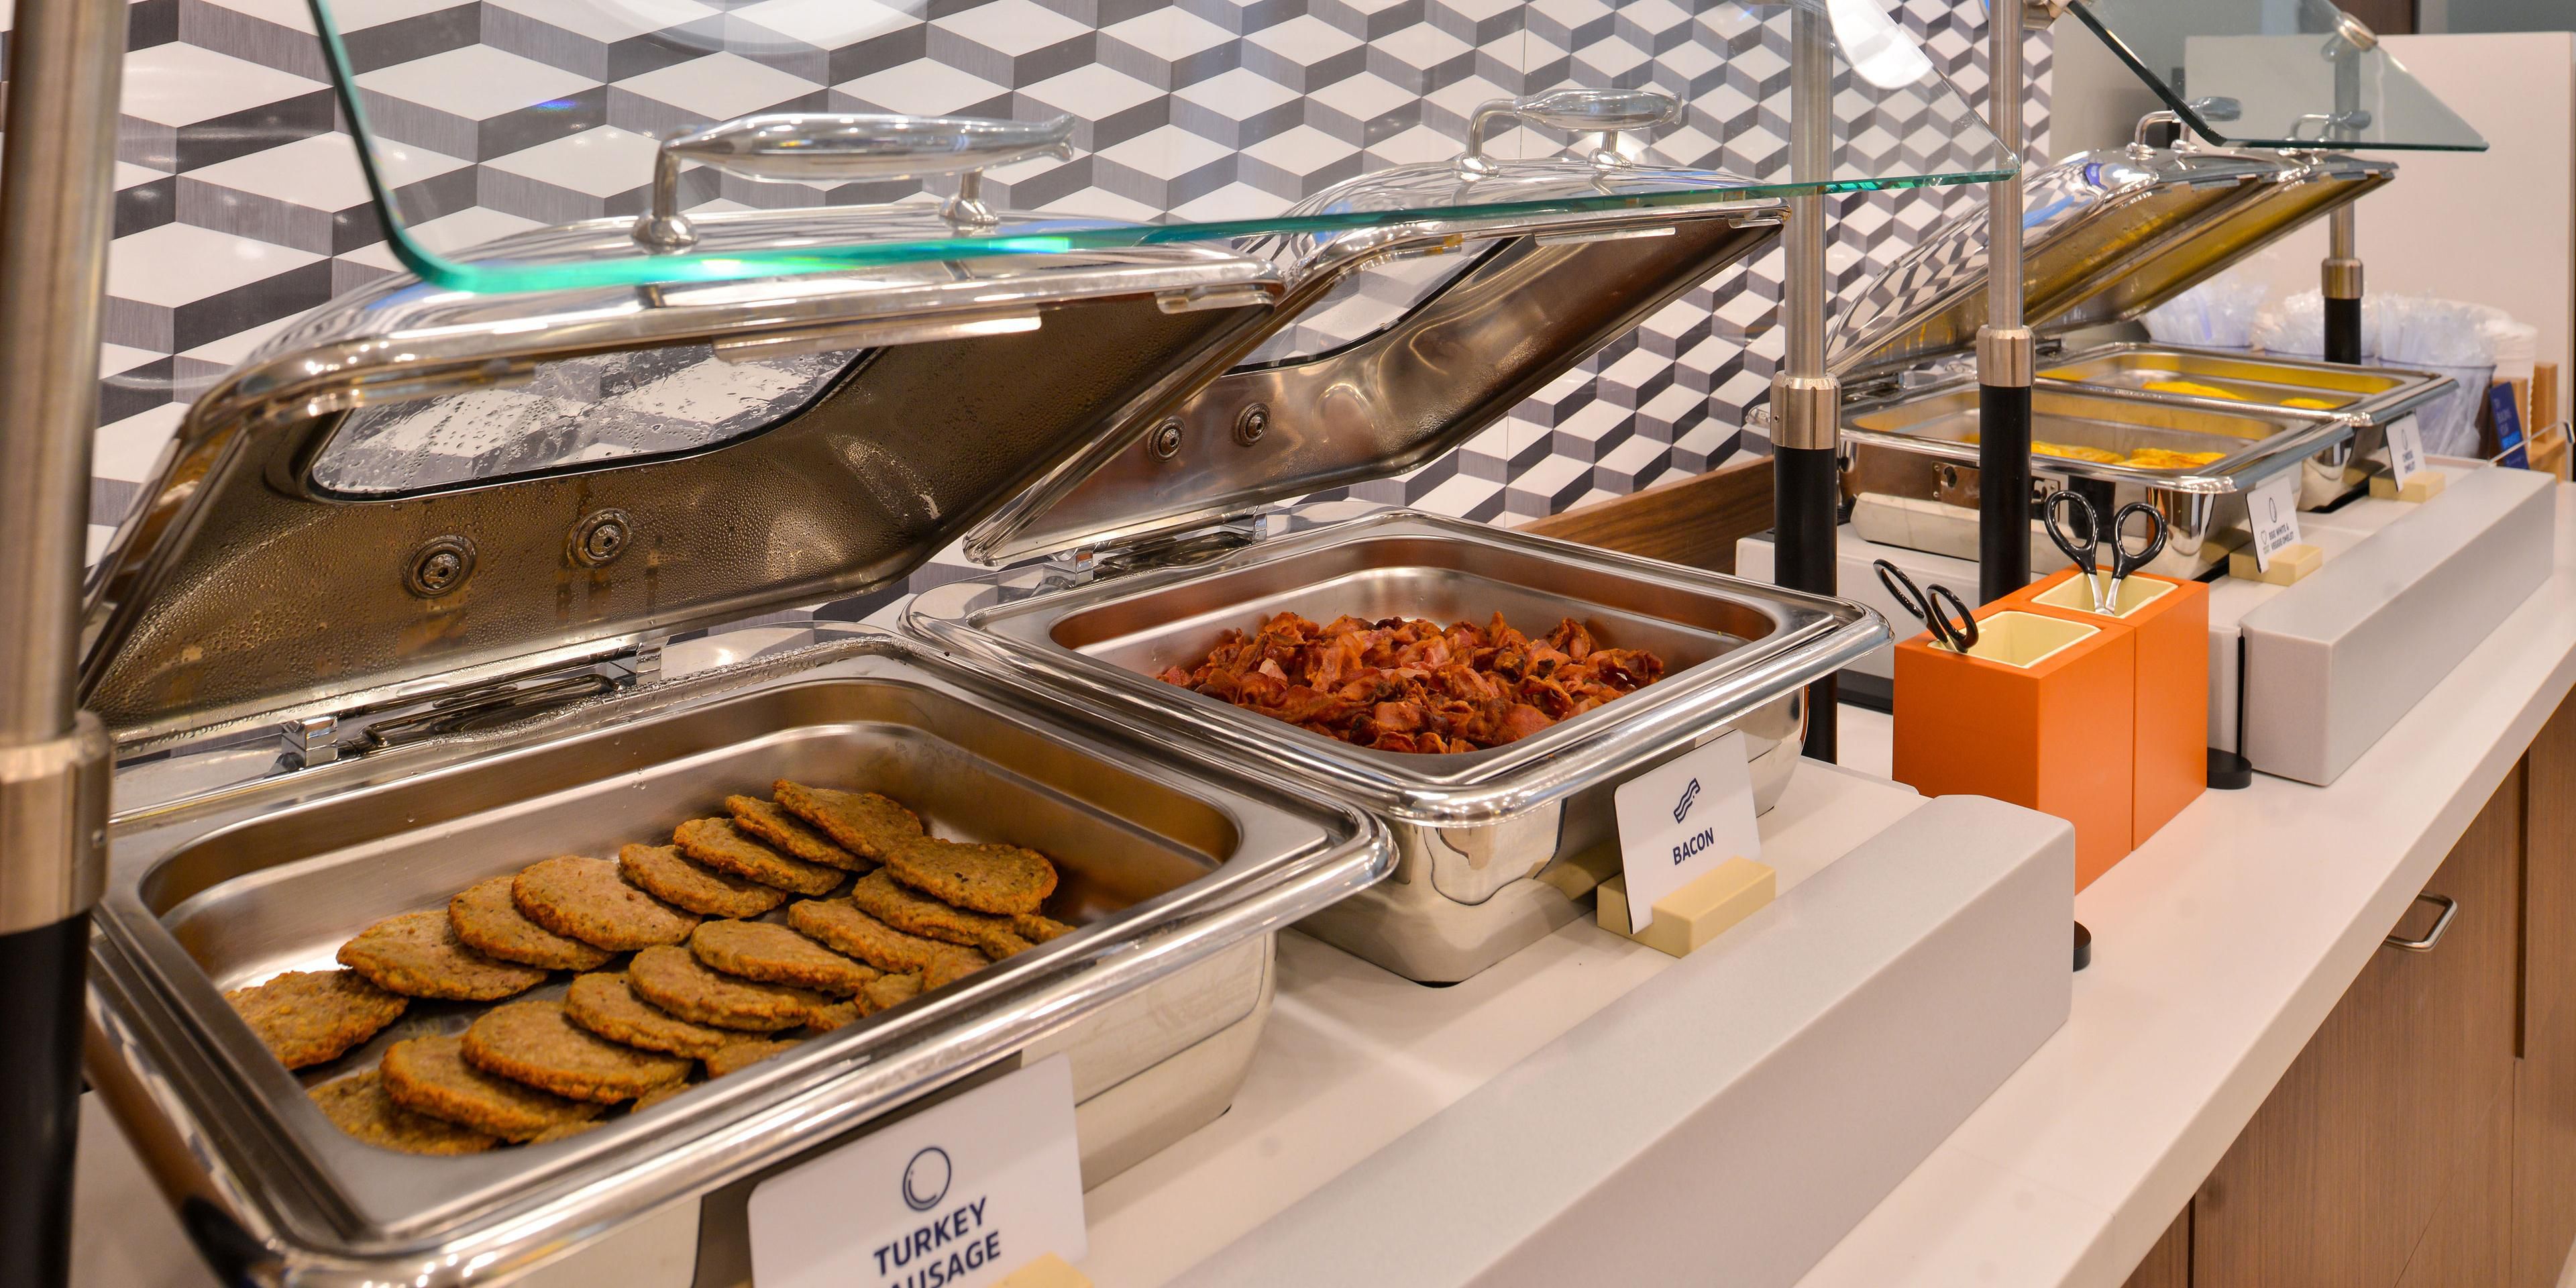 Start your morning off right with our complimentary breakfast buffet offered daily. There's something for everyone with our offerings of hot, fresh and healthy options.
